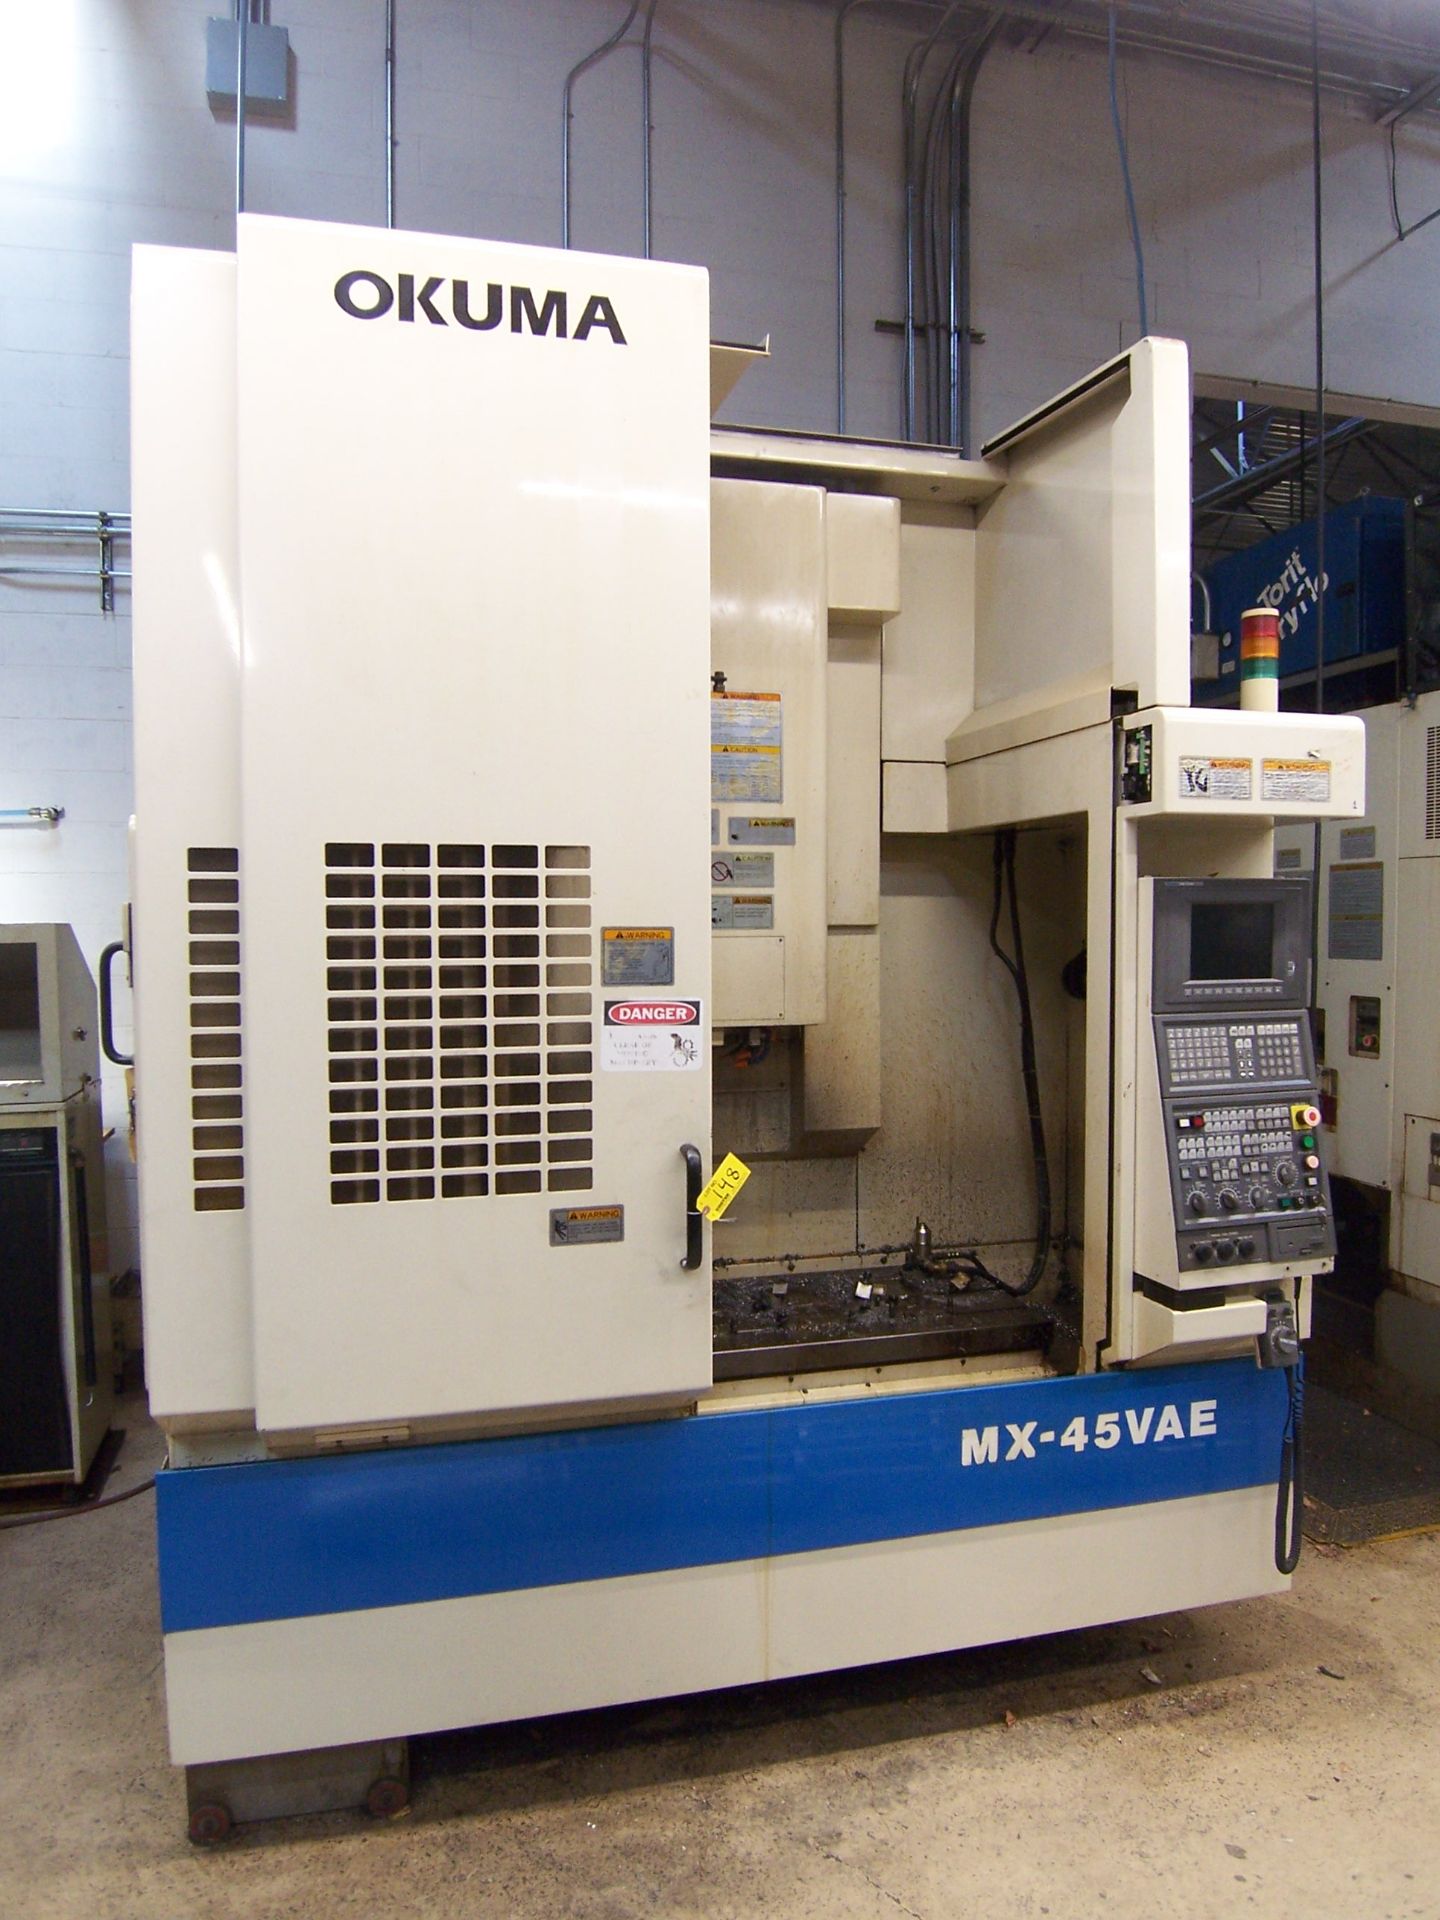 OKUMA MDL. MX-45VAE VERTICAL MACHINING CENTER WITH 18.11" X 39-1/2" TABLE, TRAVELS: X-30, Y-18.11" - Image 3 of 8